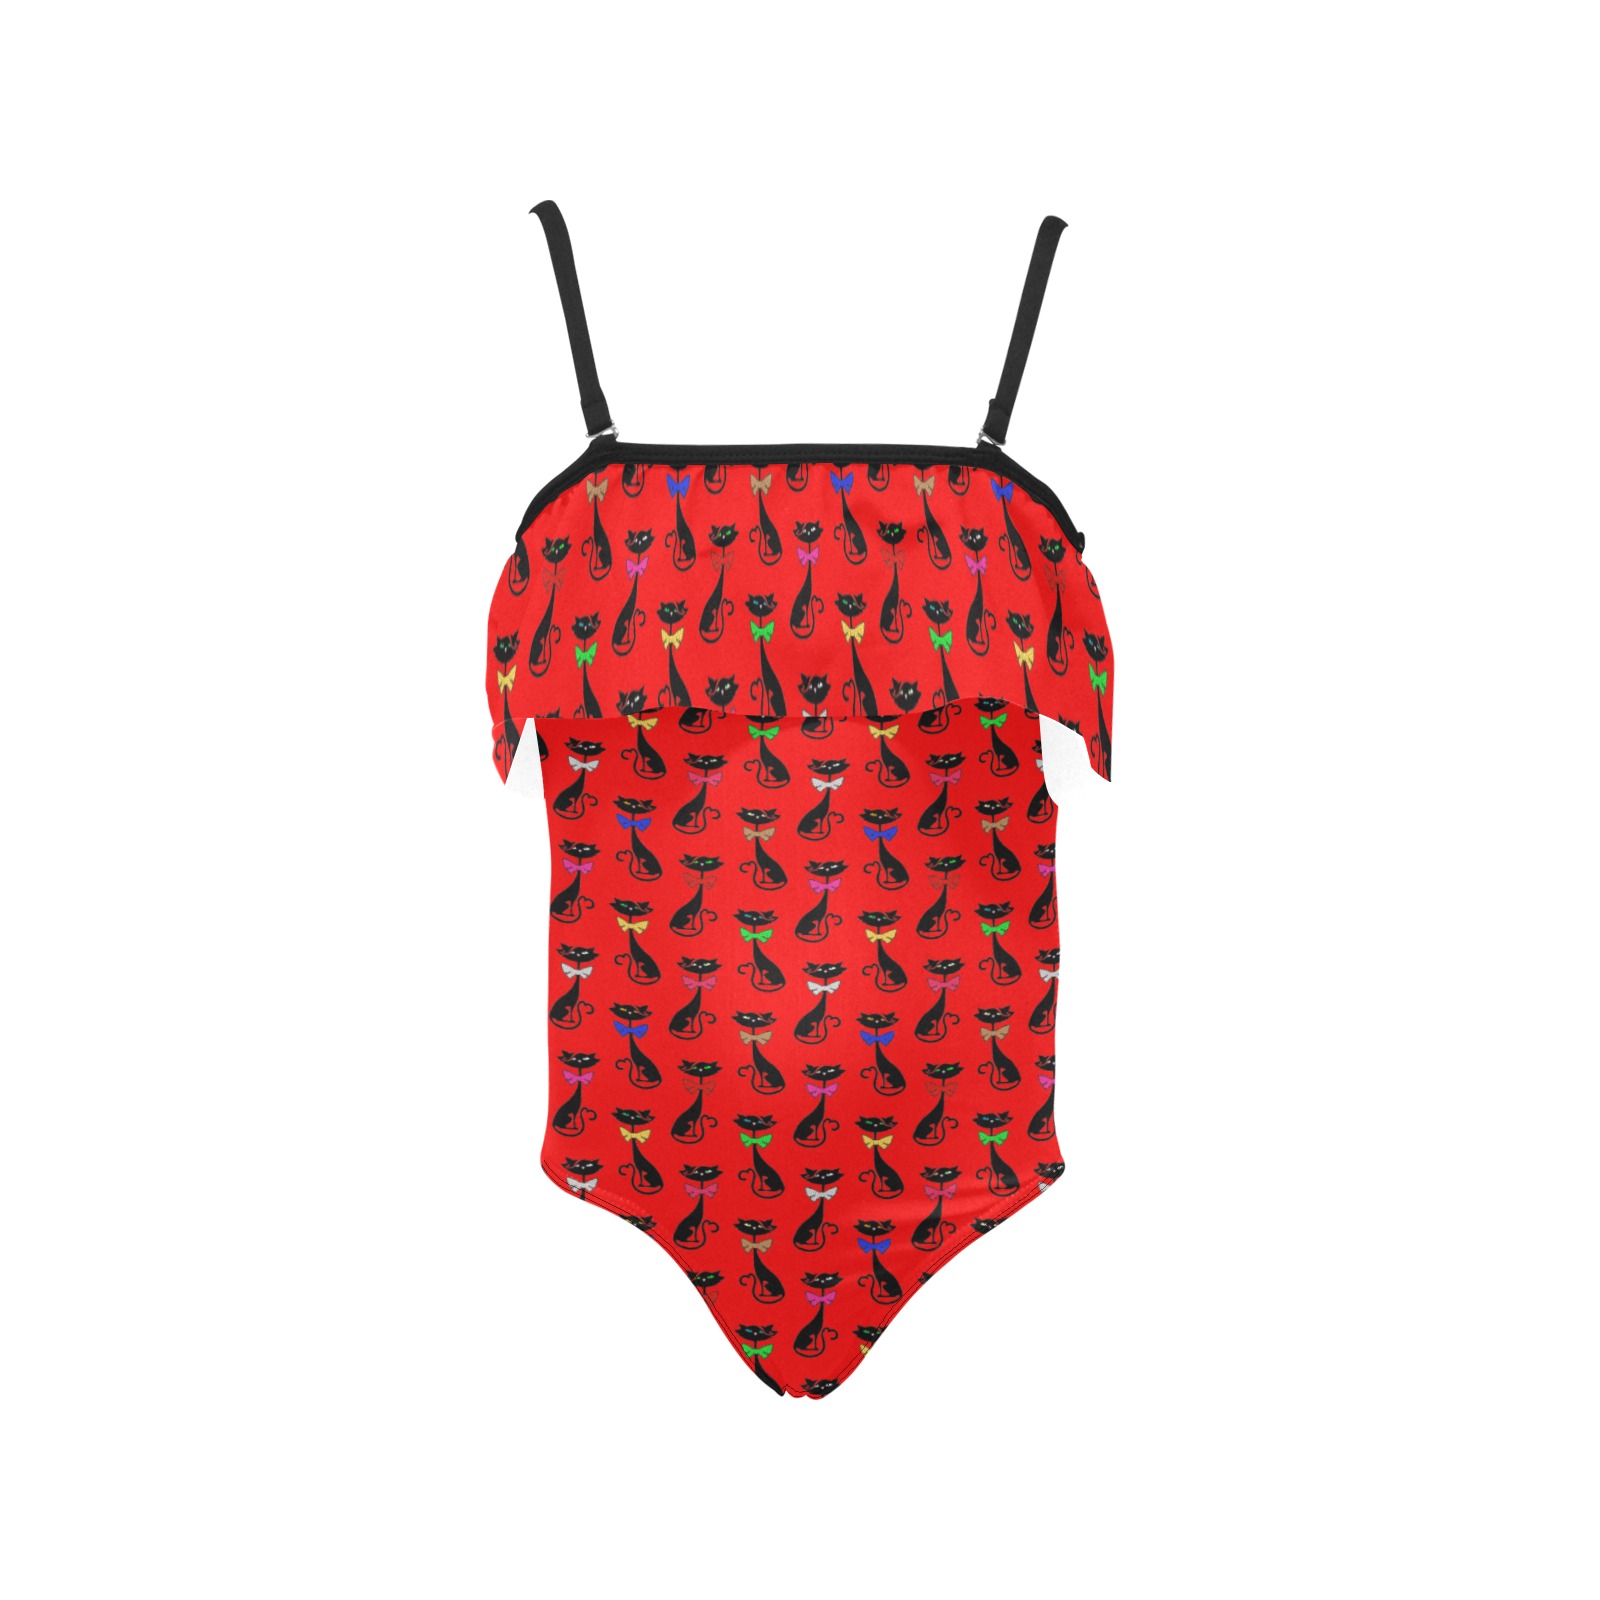 Black Cats Wearing Bow Ties - Red Kids' Spaghetti Strap Ruffle Swimsuit (Model S26)